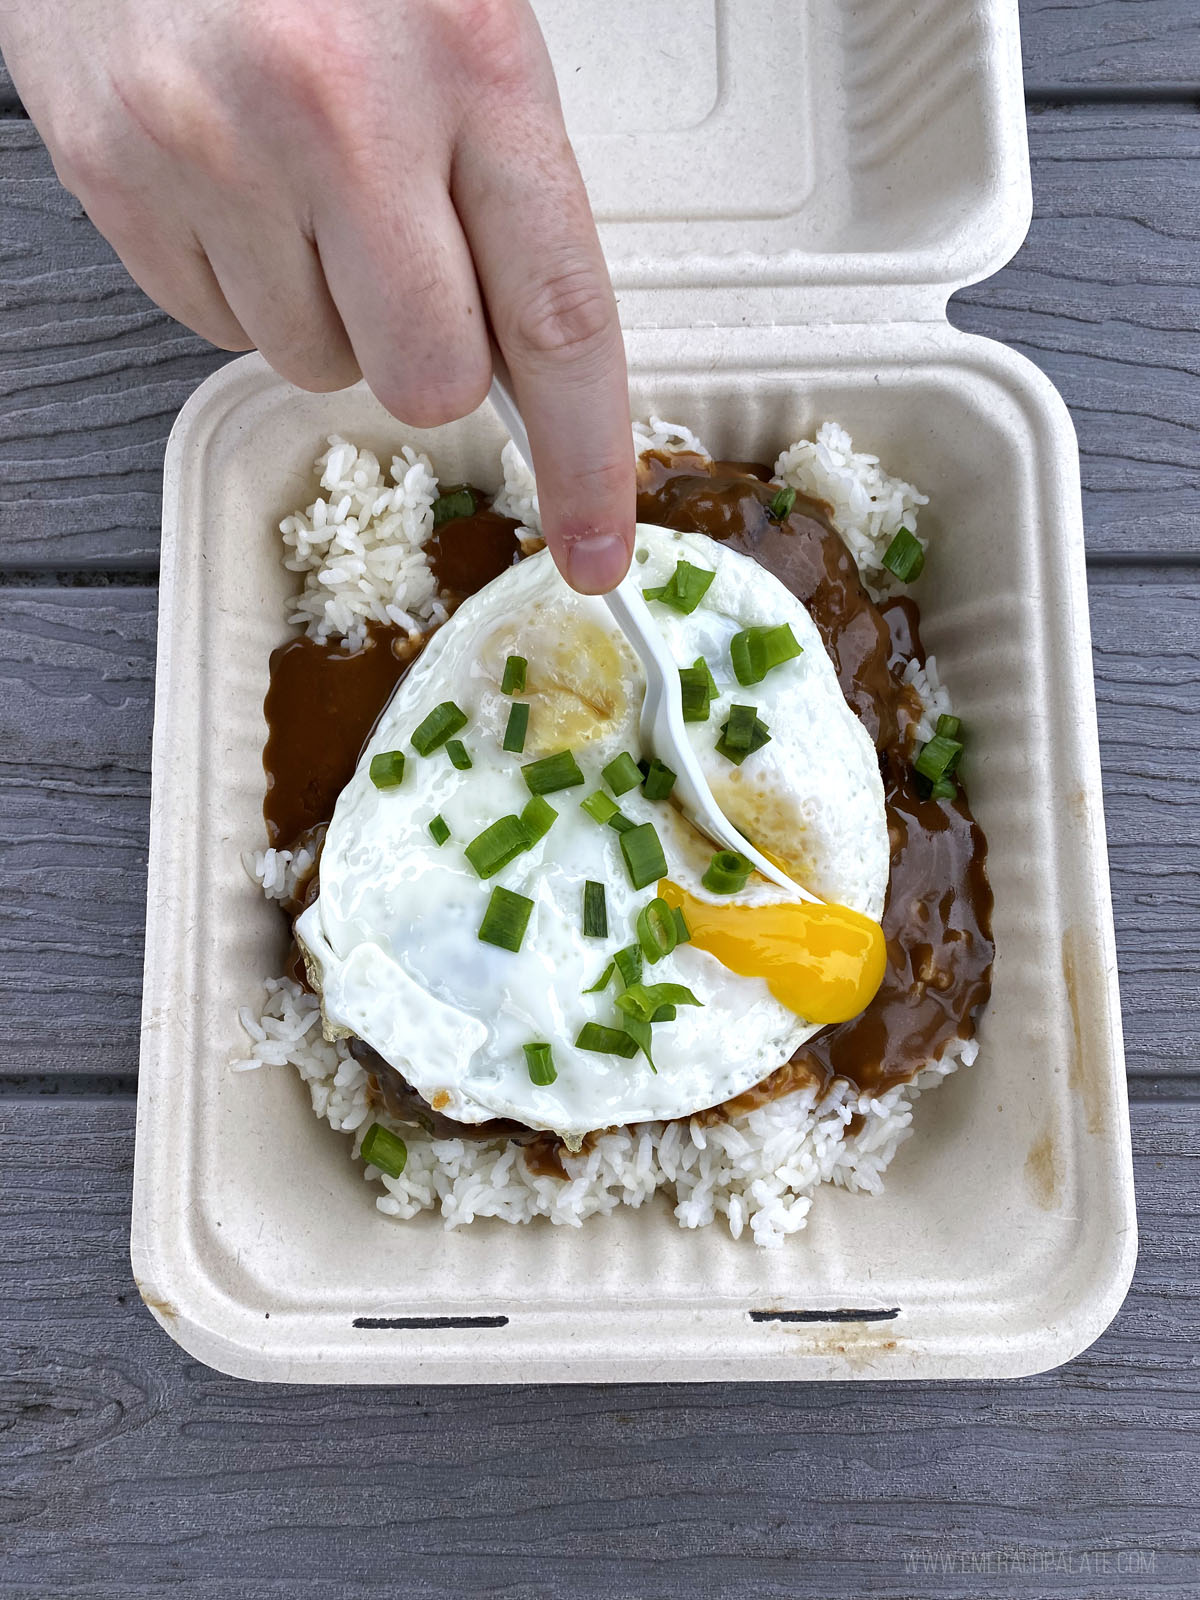 person cutting an egg in loco moco in Maui